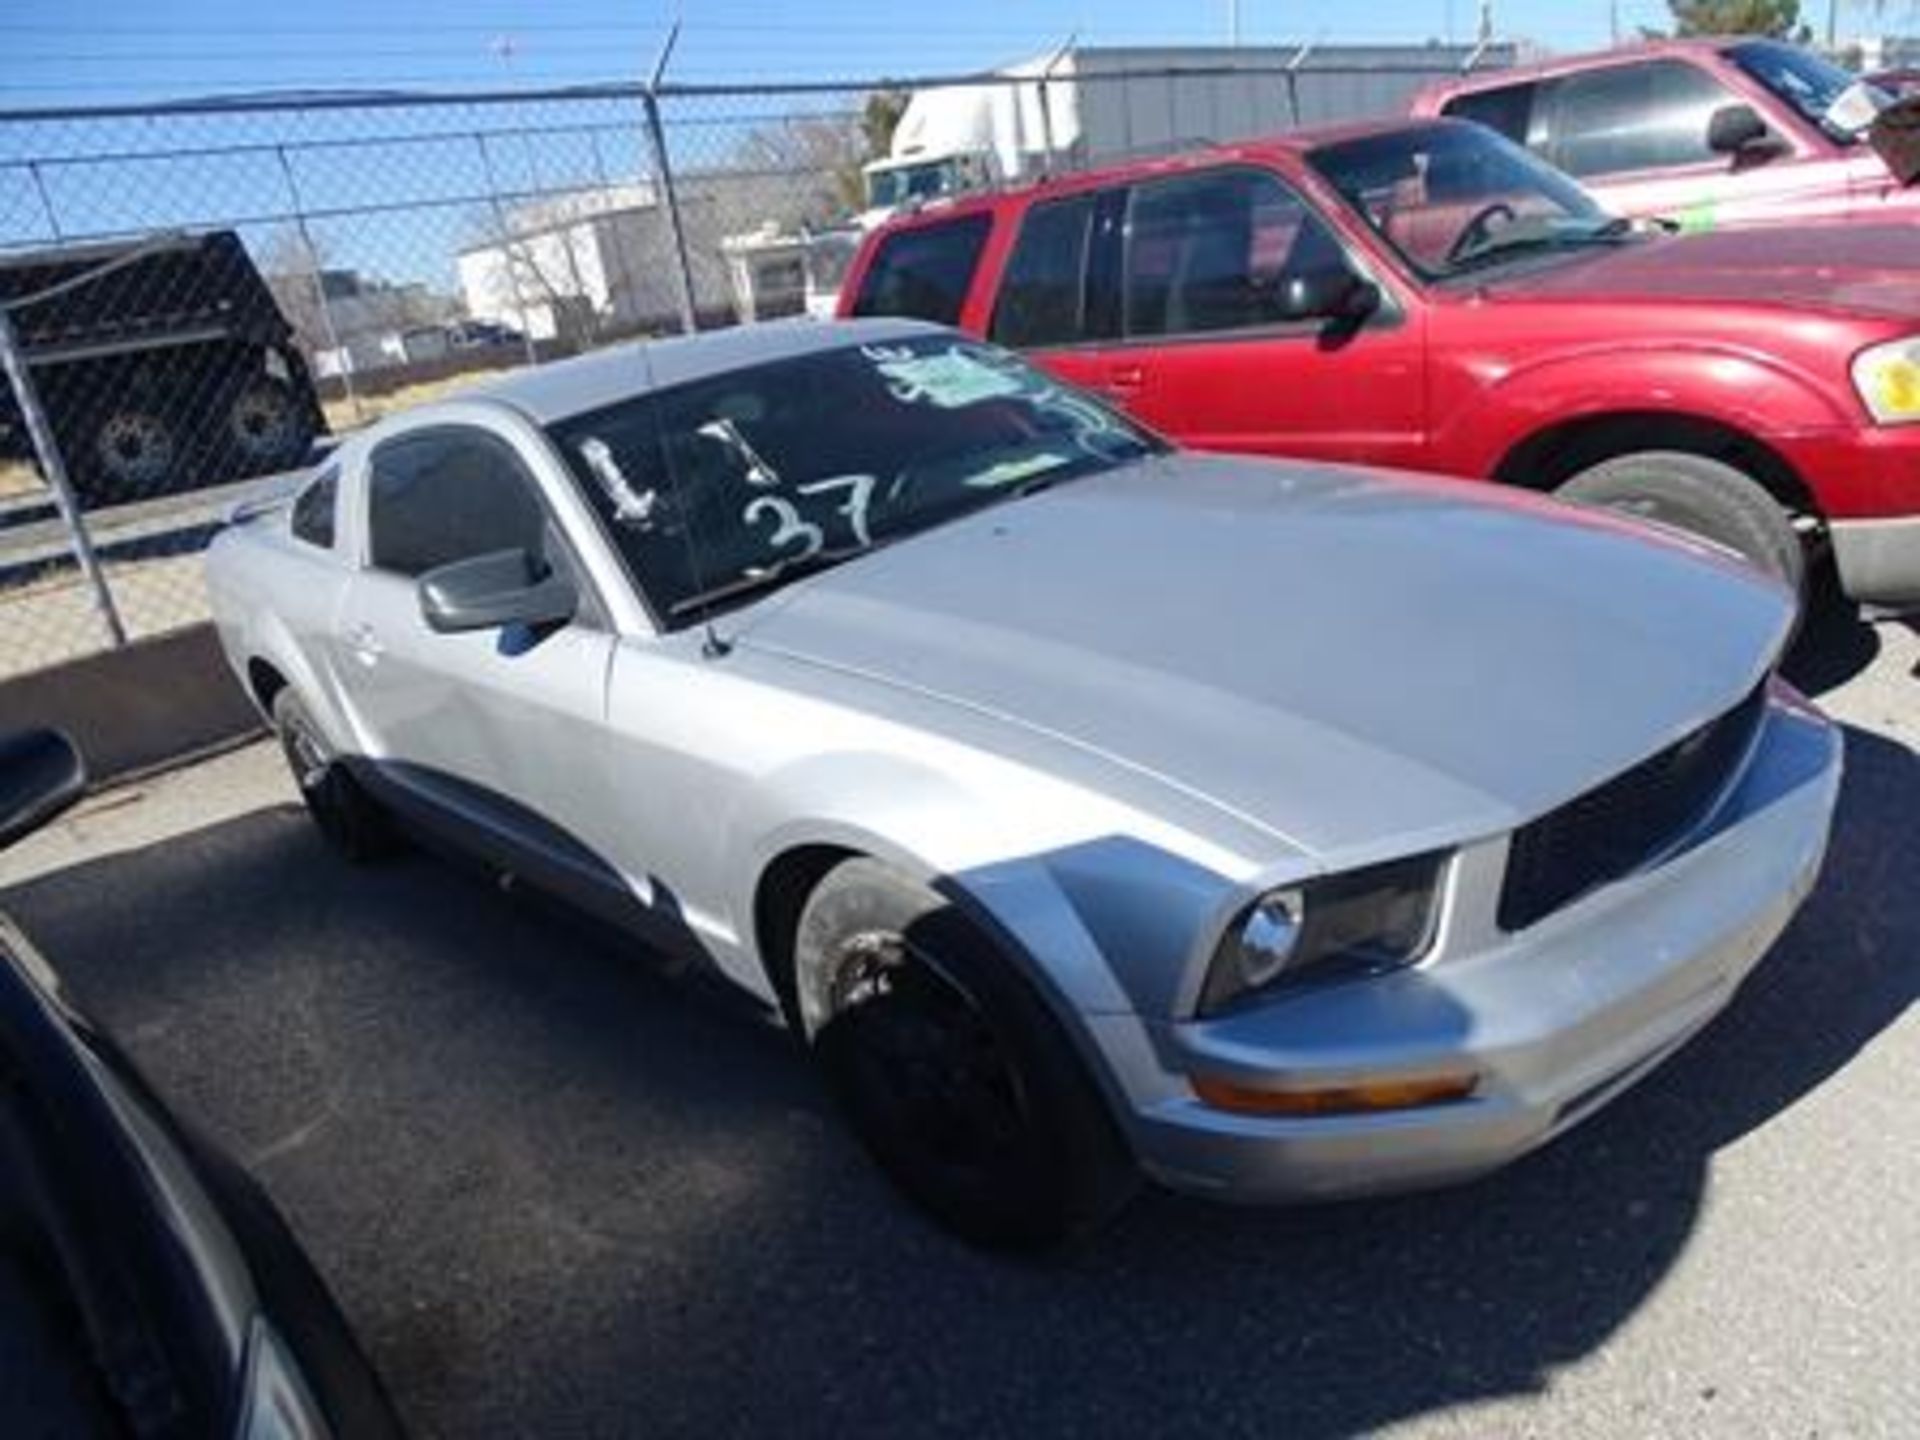 Vehículo Marca Ford Mustang, Tipo Sedan, Modelo 2007, Located In: Chihuahua, Deposit Of: $5000 - Image 9 of 17